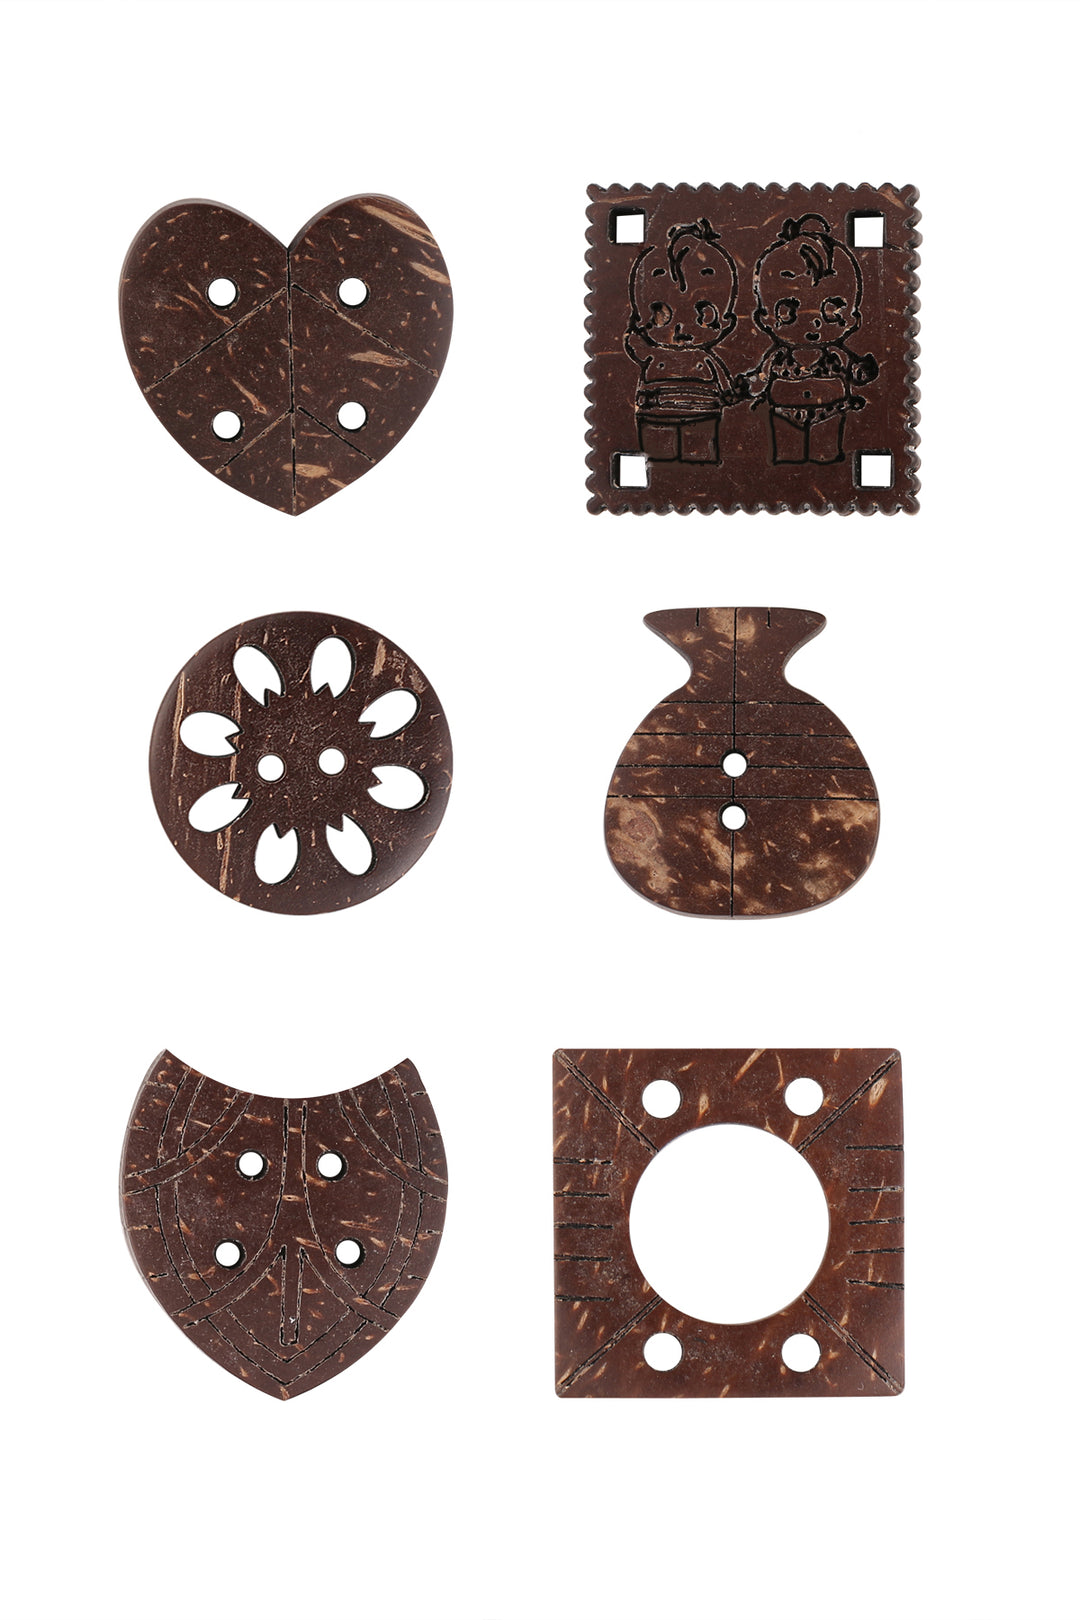 Decorative Set of 6 Combination Different Shapes Brown Coco Buttons